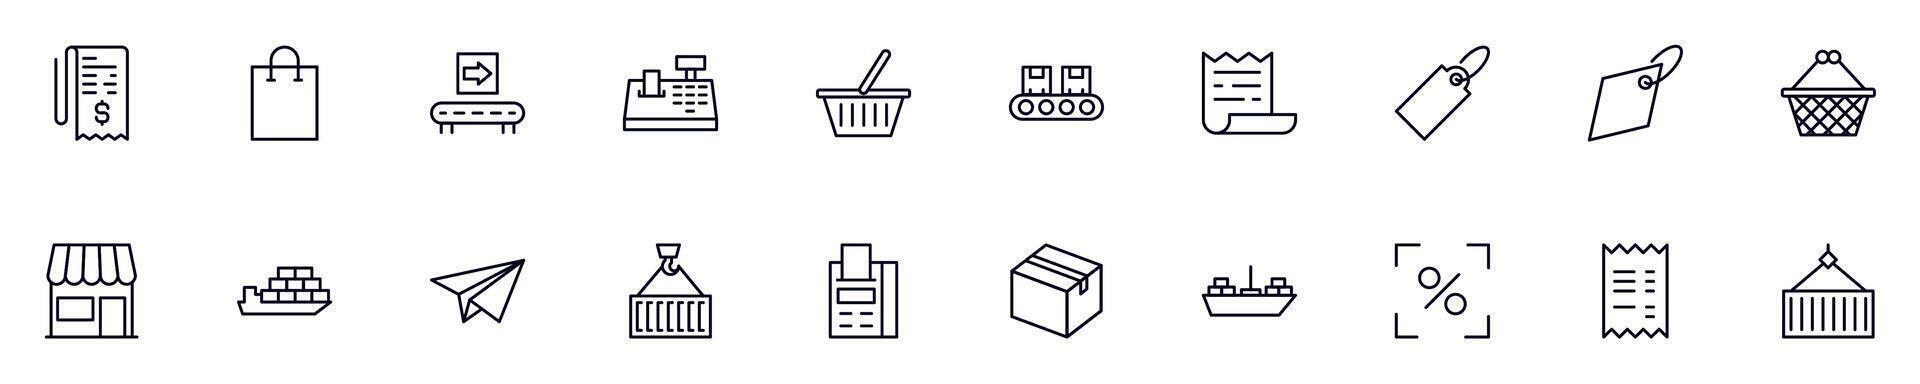 Collections of line icons of commerce. Simple linear illustration that perfect for web banners, social networks, articles, infographics vector